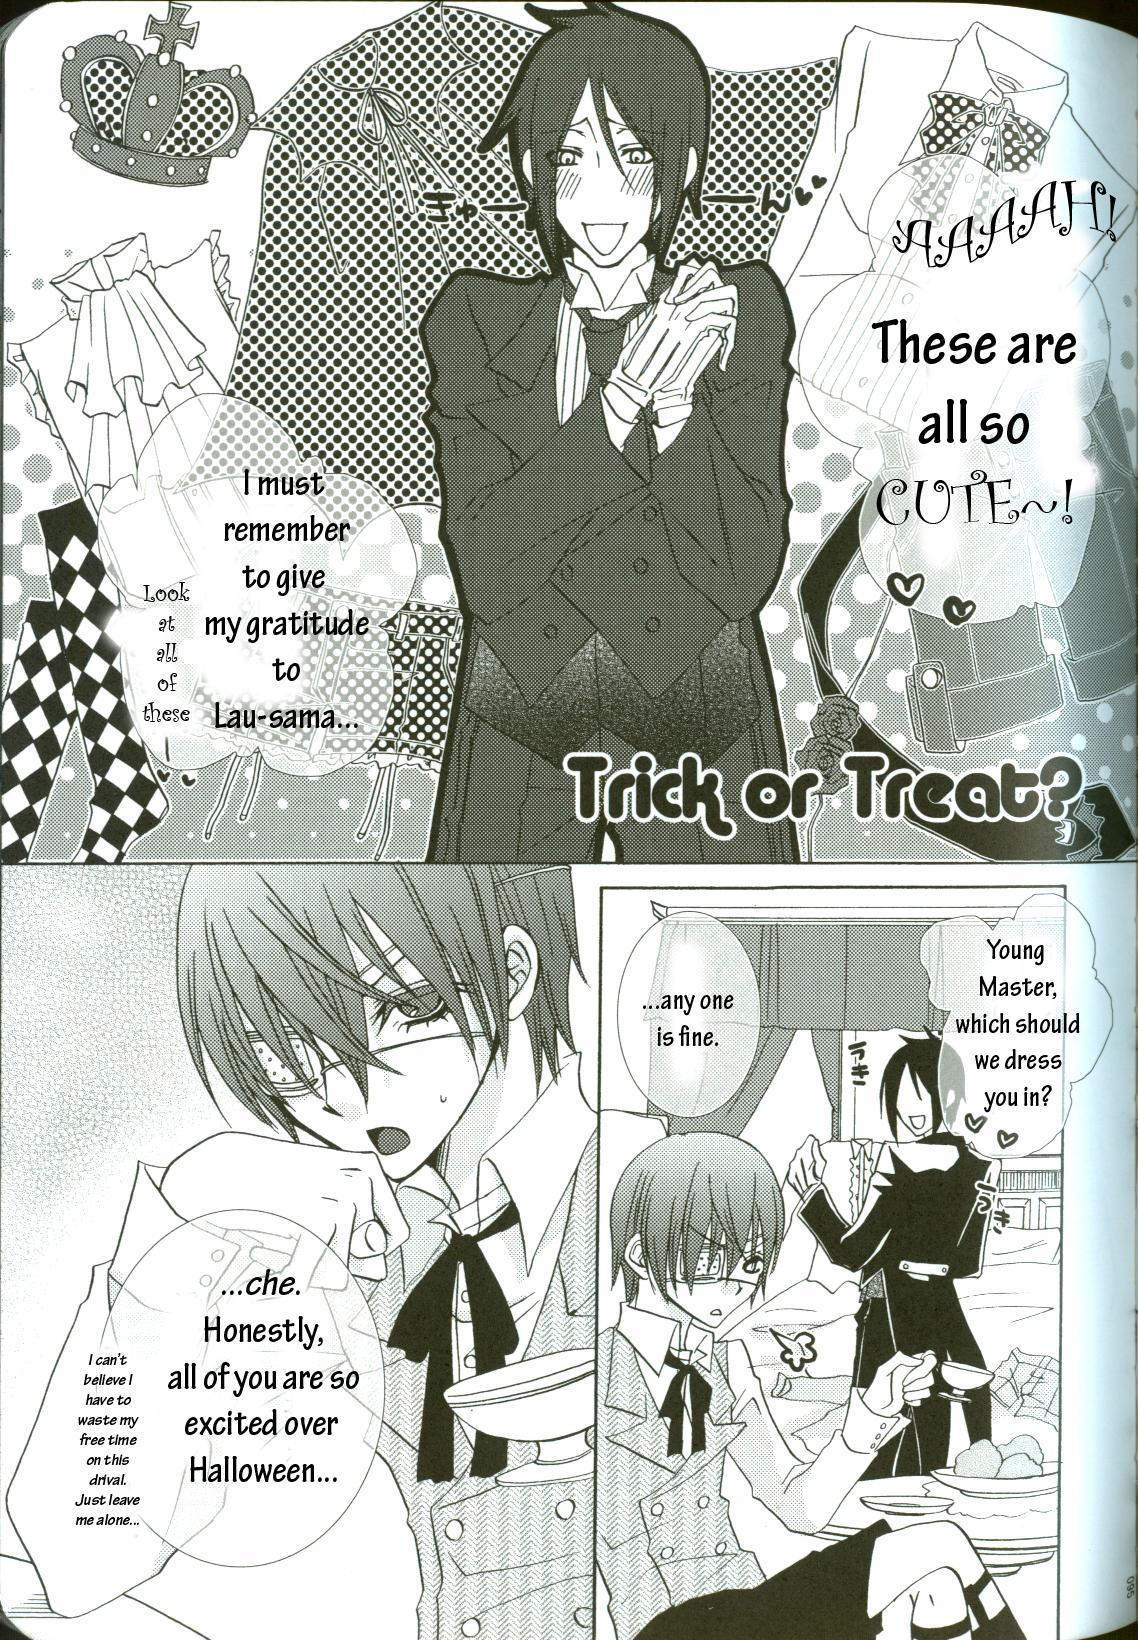 Urine Trick or Treat? - Black butler Hungarian - Page 2